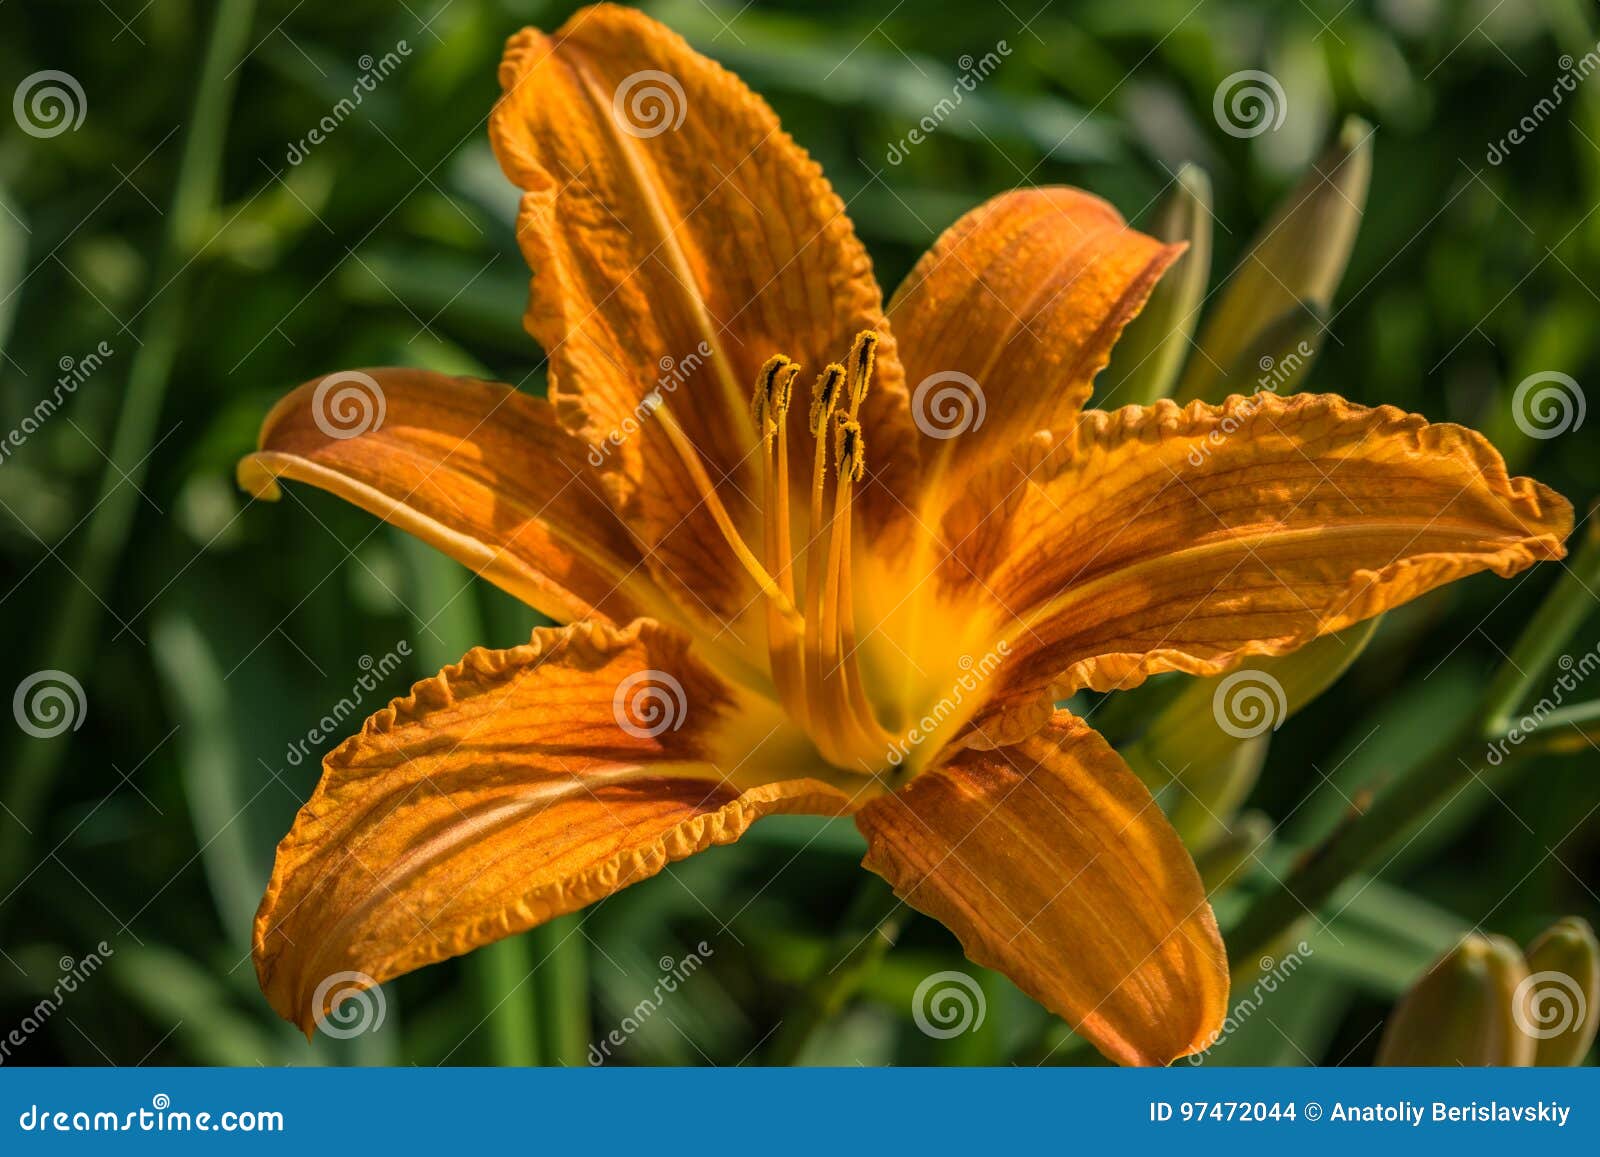 Vibrant yellow lilies. stock photo. Image of background - 97472044